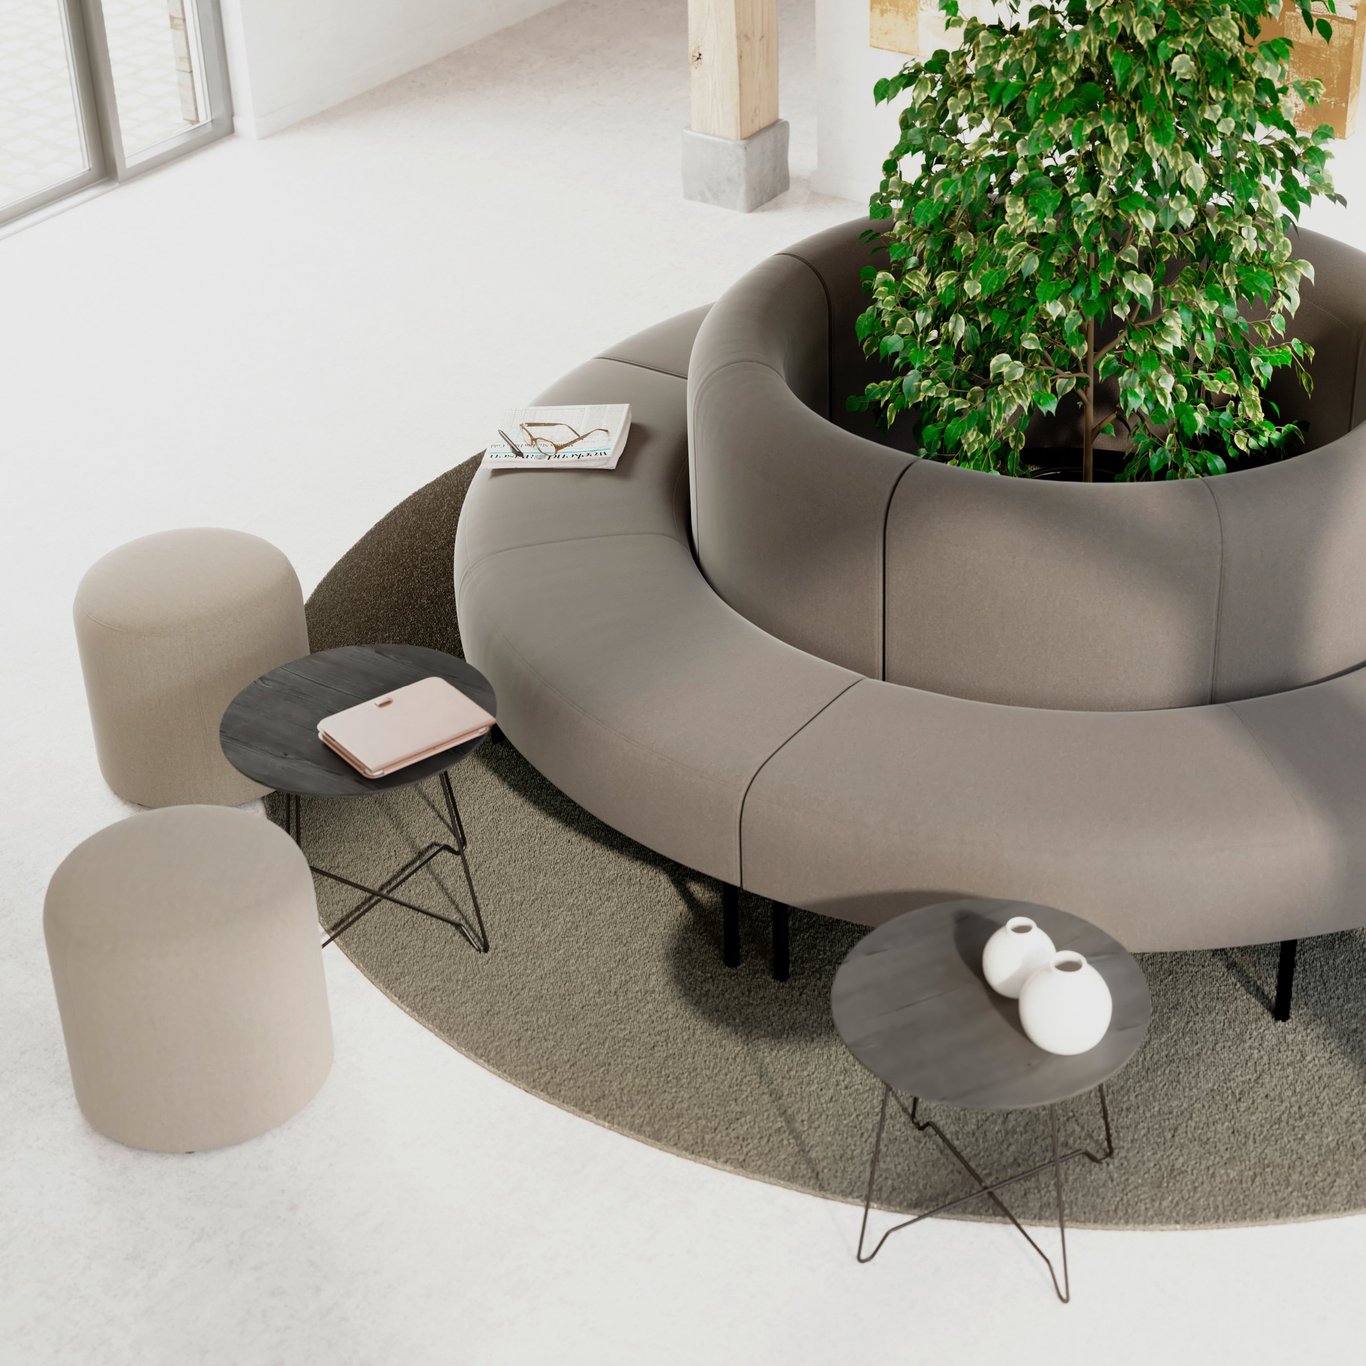 A grey circular sofa with plants in the middle